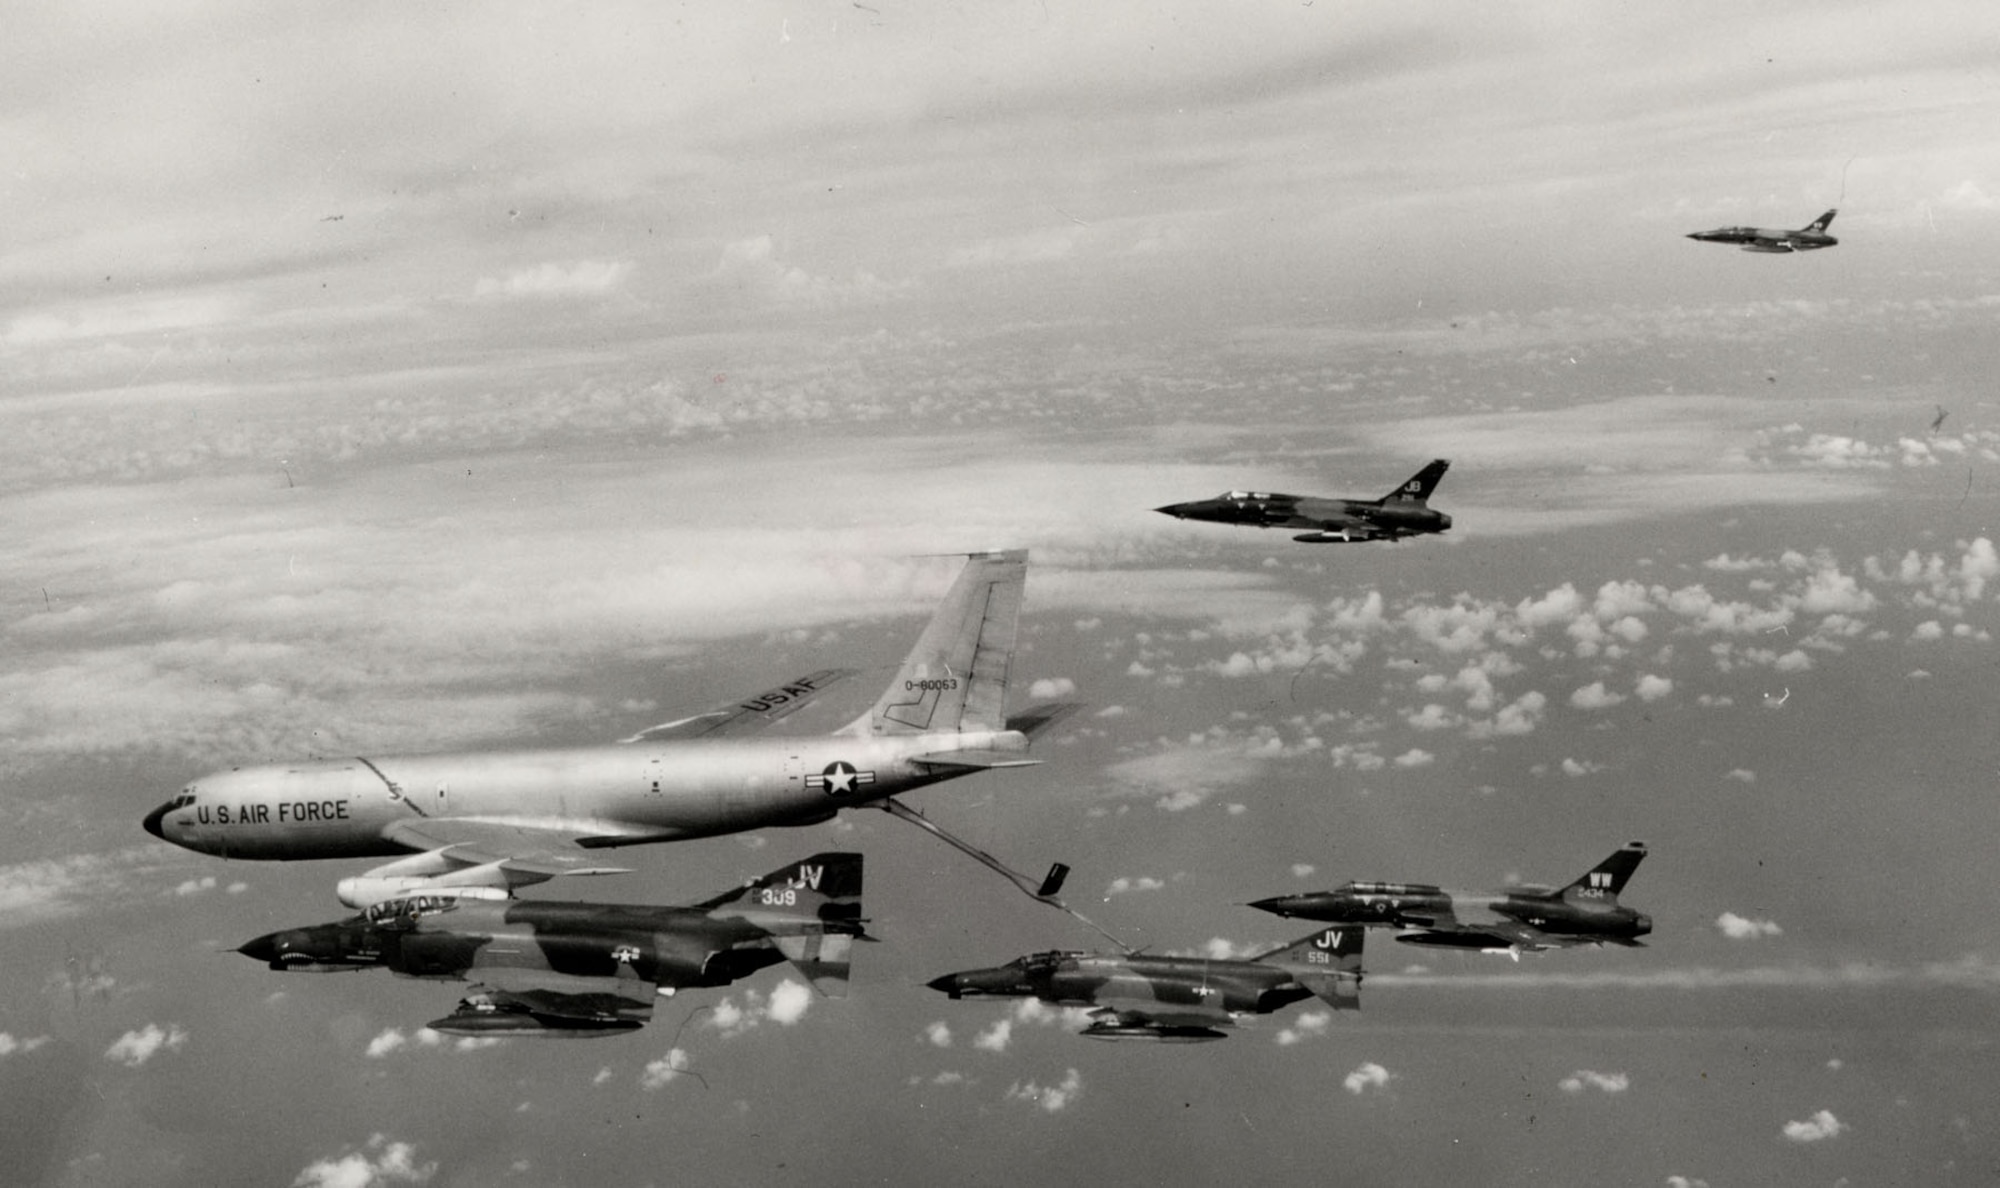 Hunter killer group of F-105G Wild Weasels and F-4Es take fuel on the way to North Vietnam for a LINEBACKER strike in the summer of 1972. (U.S. Air Force photo)